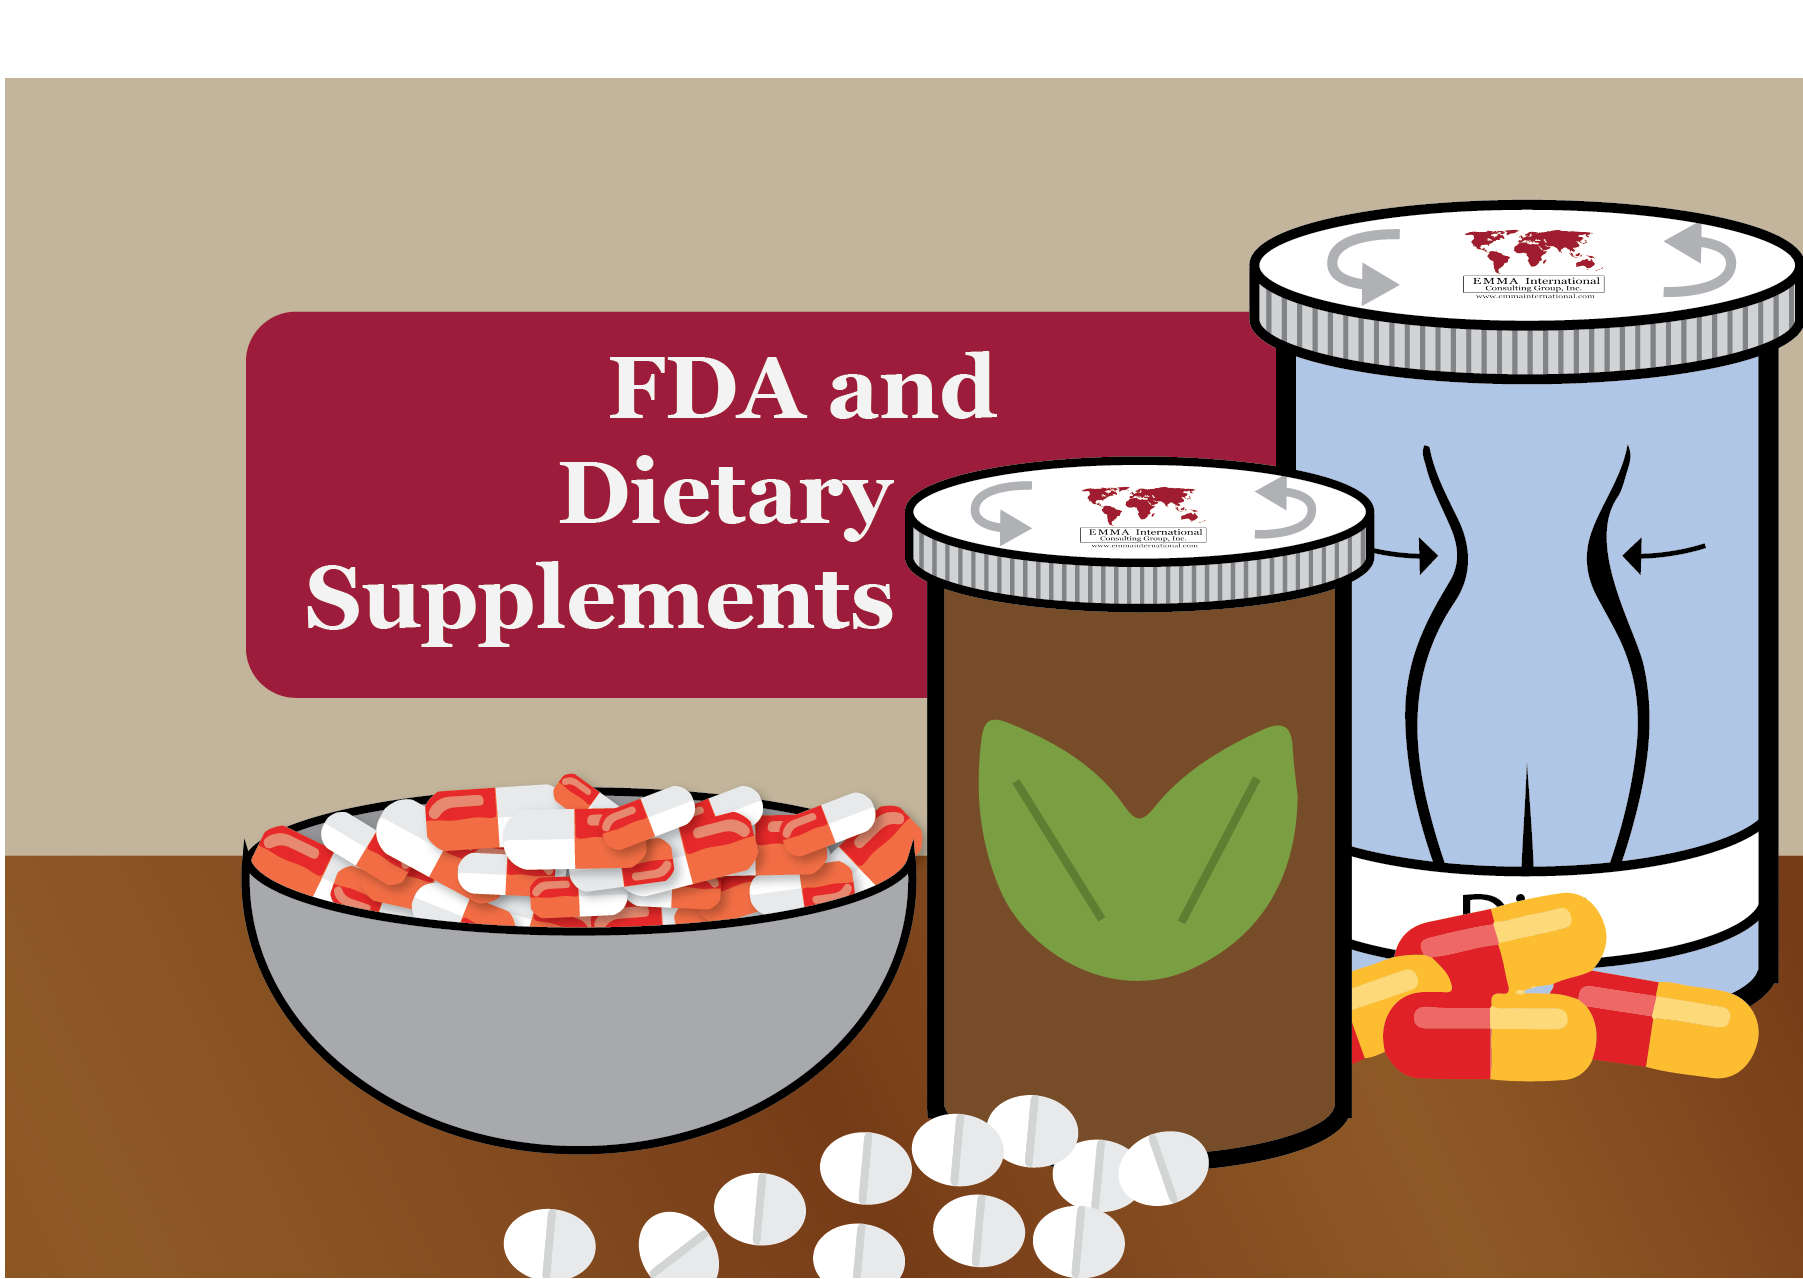 FDA and Dietary Supplements